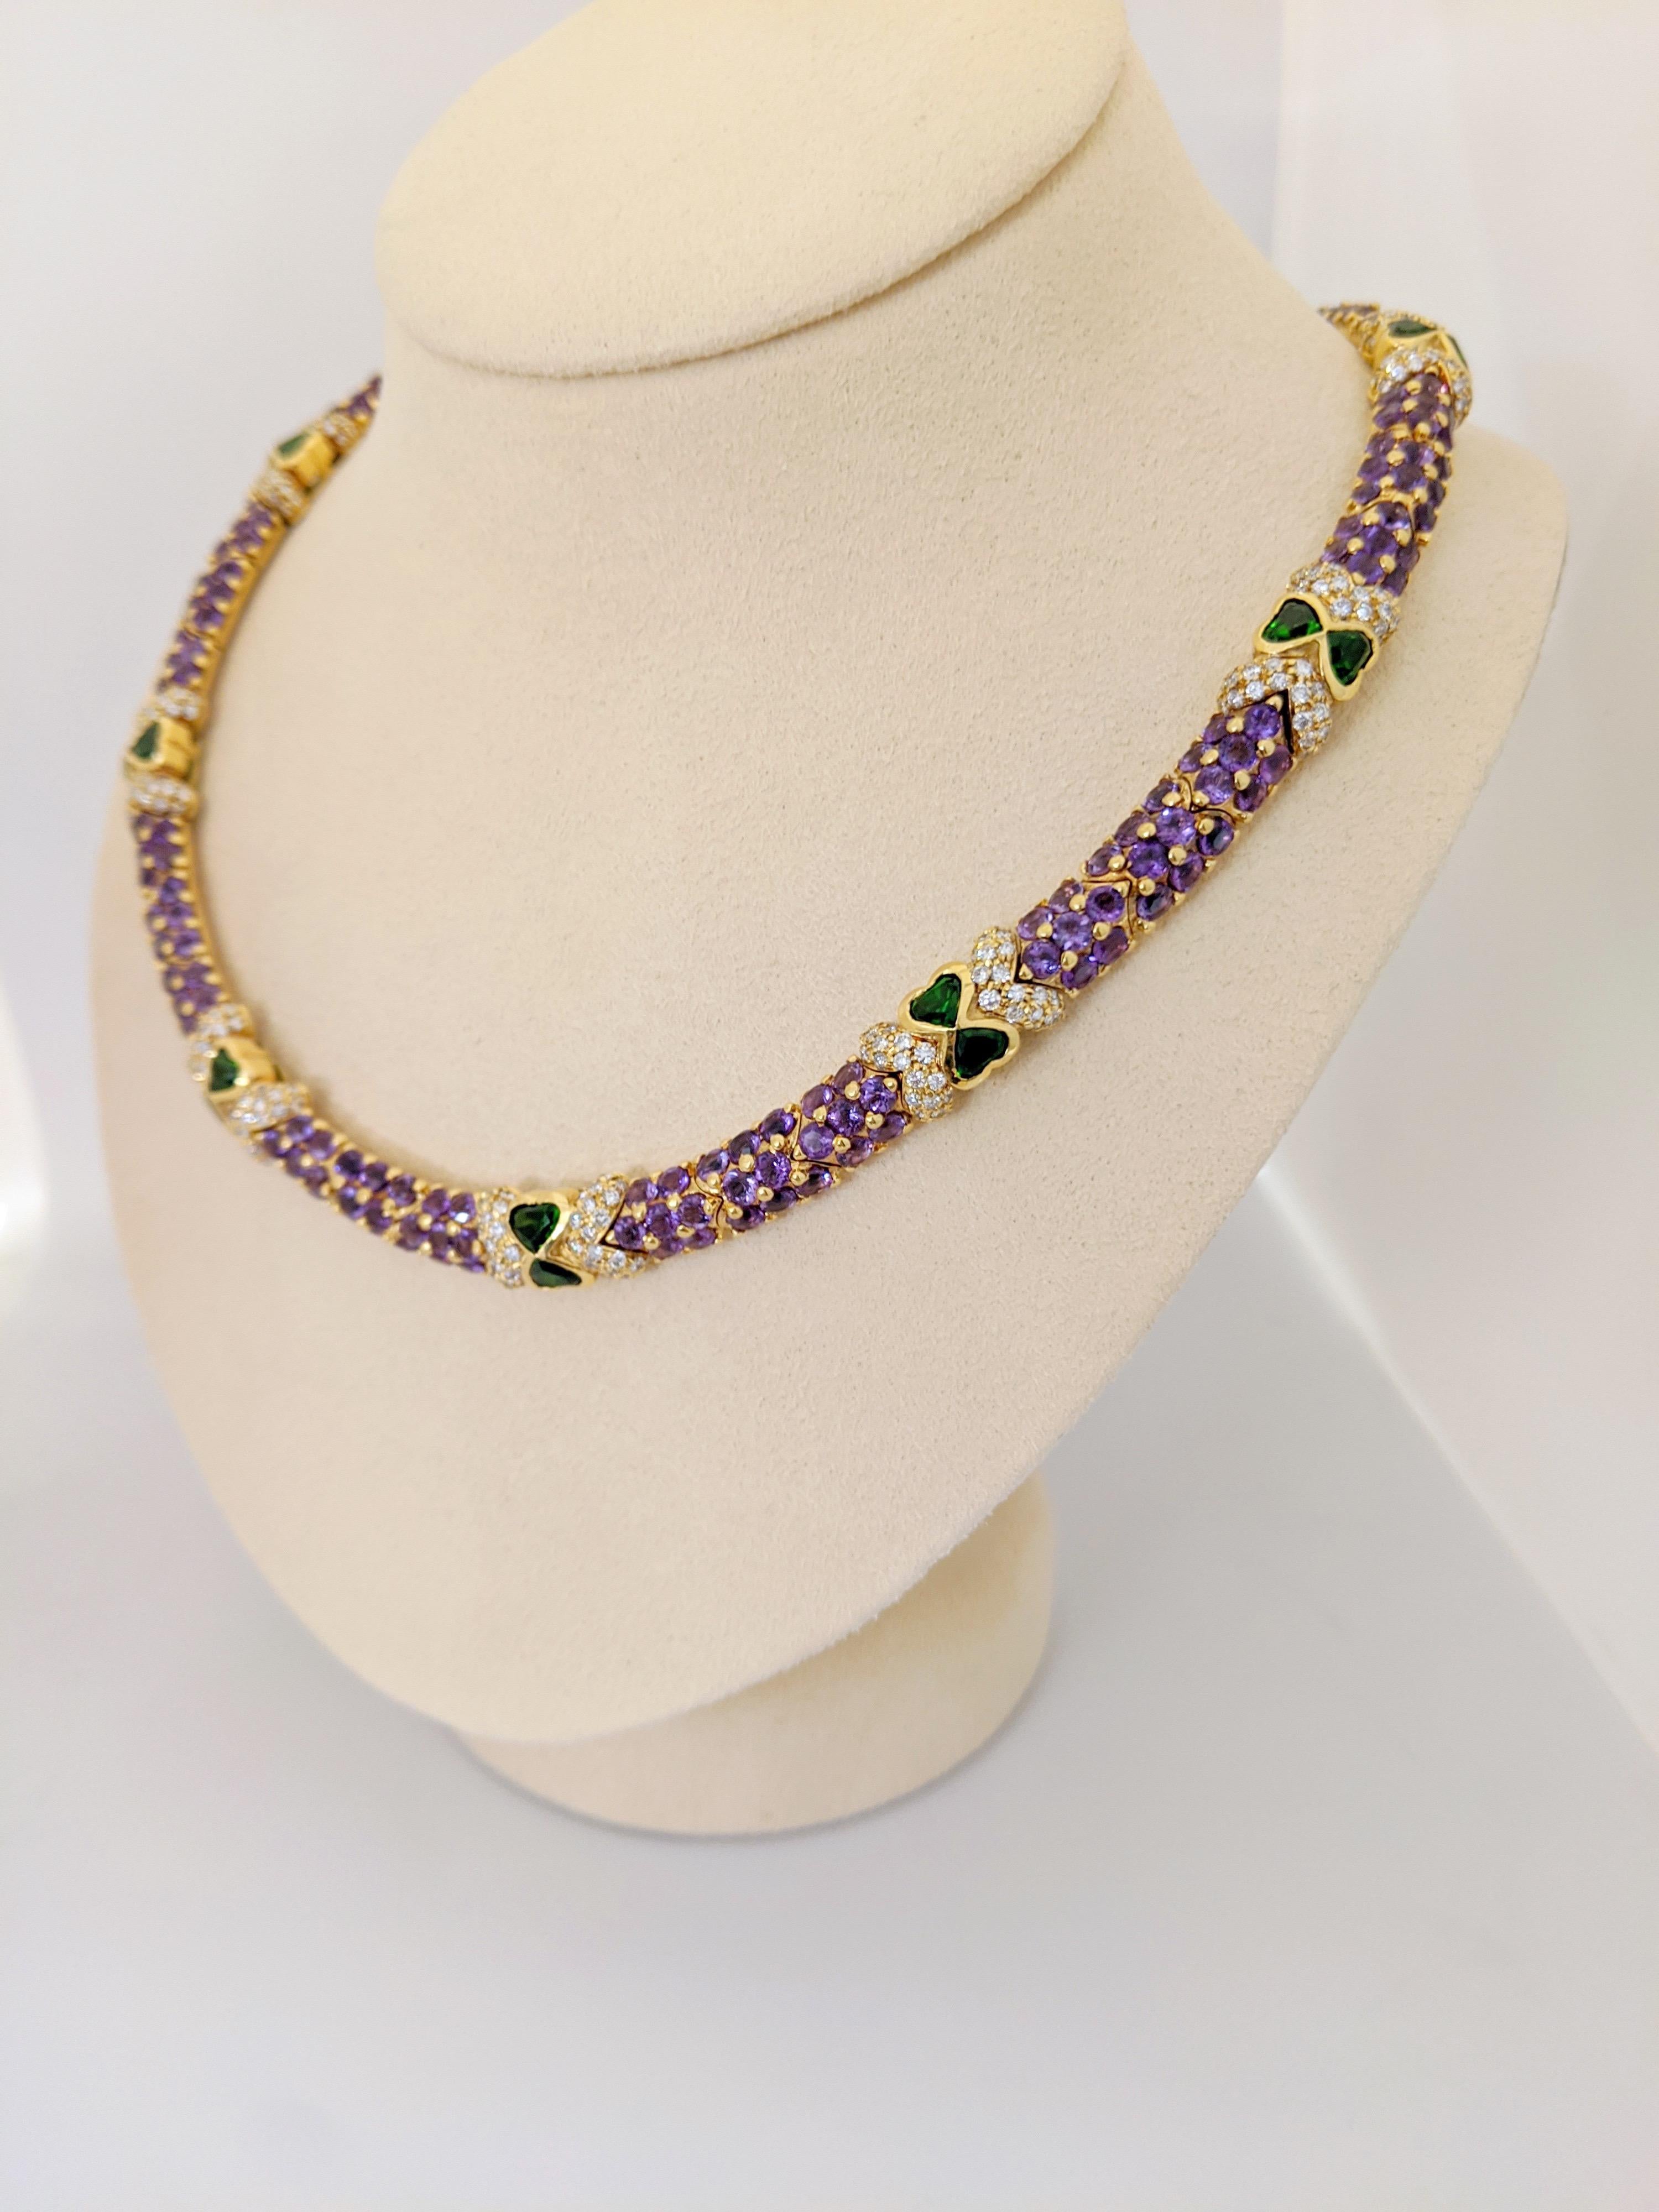 Contemporary G. Verdi 18KT Yellow Gold Necklace with 32.19Ct. Amethyst & Tsavorites, Diamonds For Sale